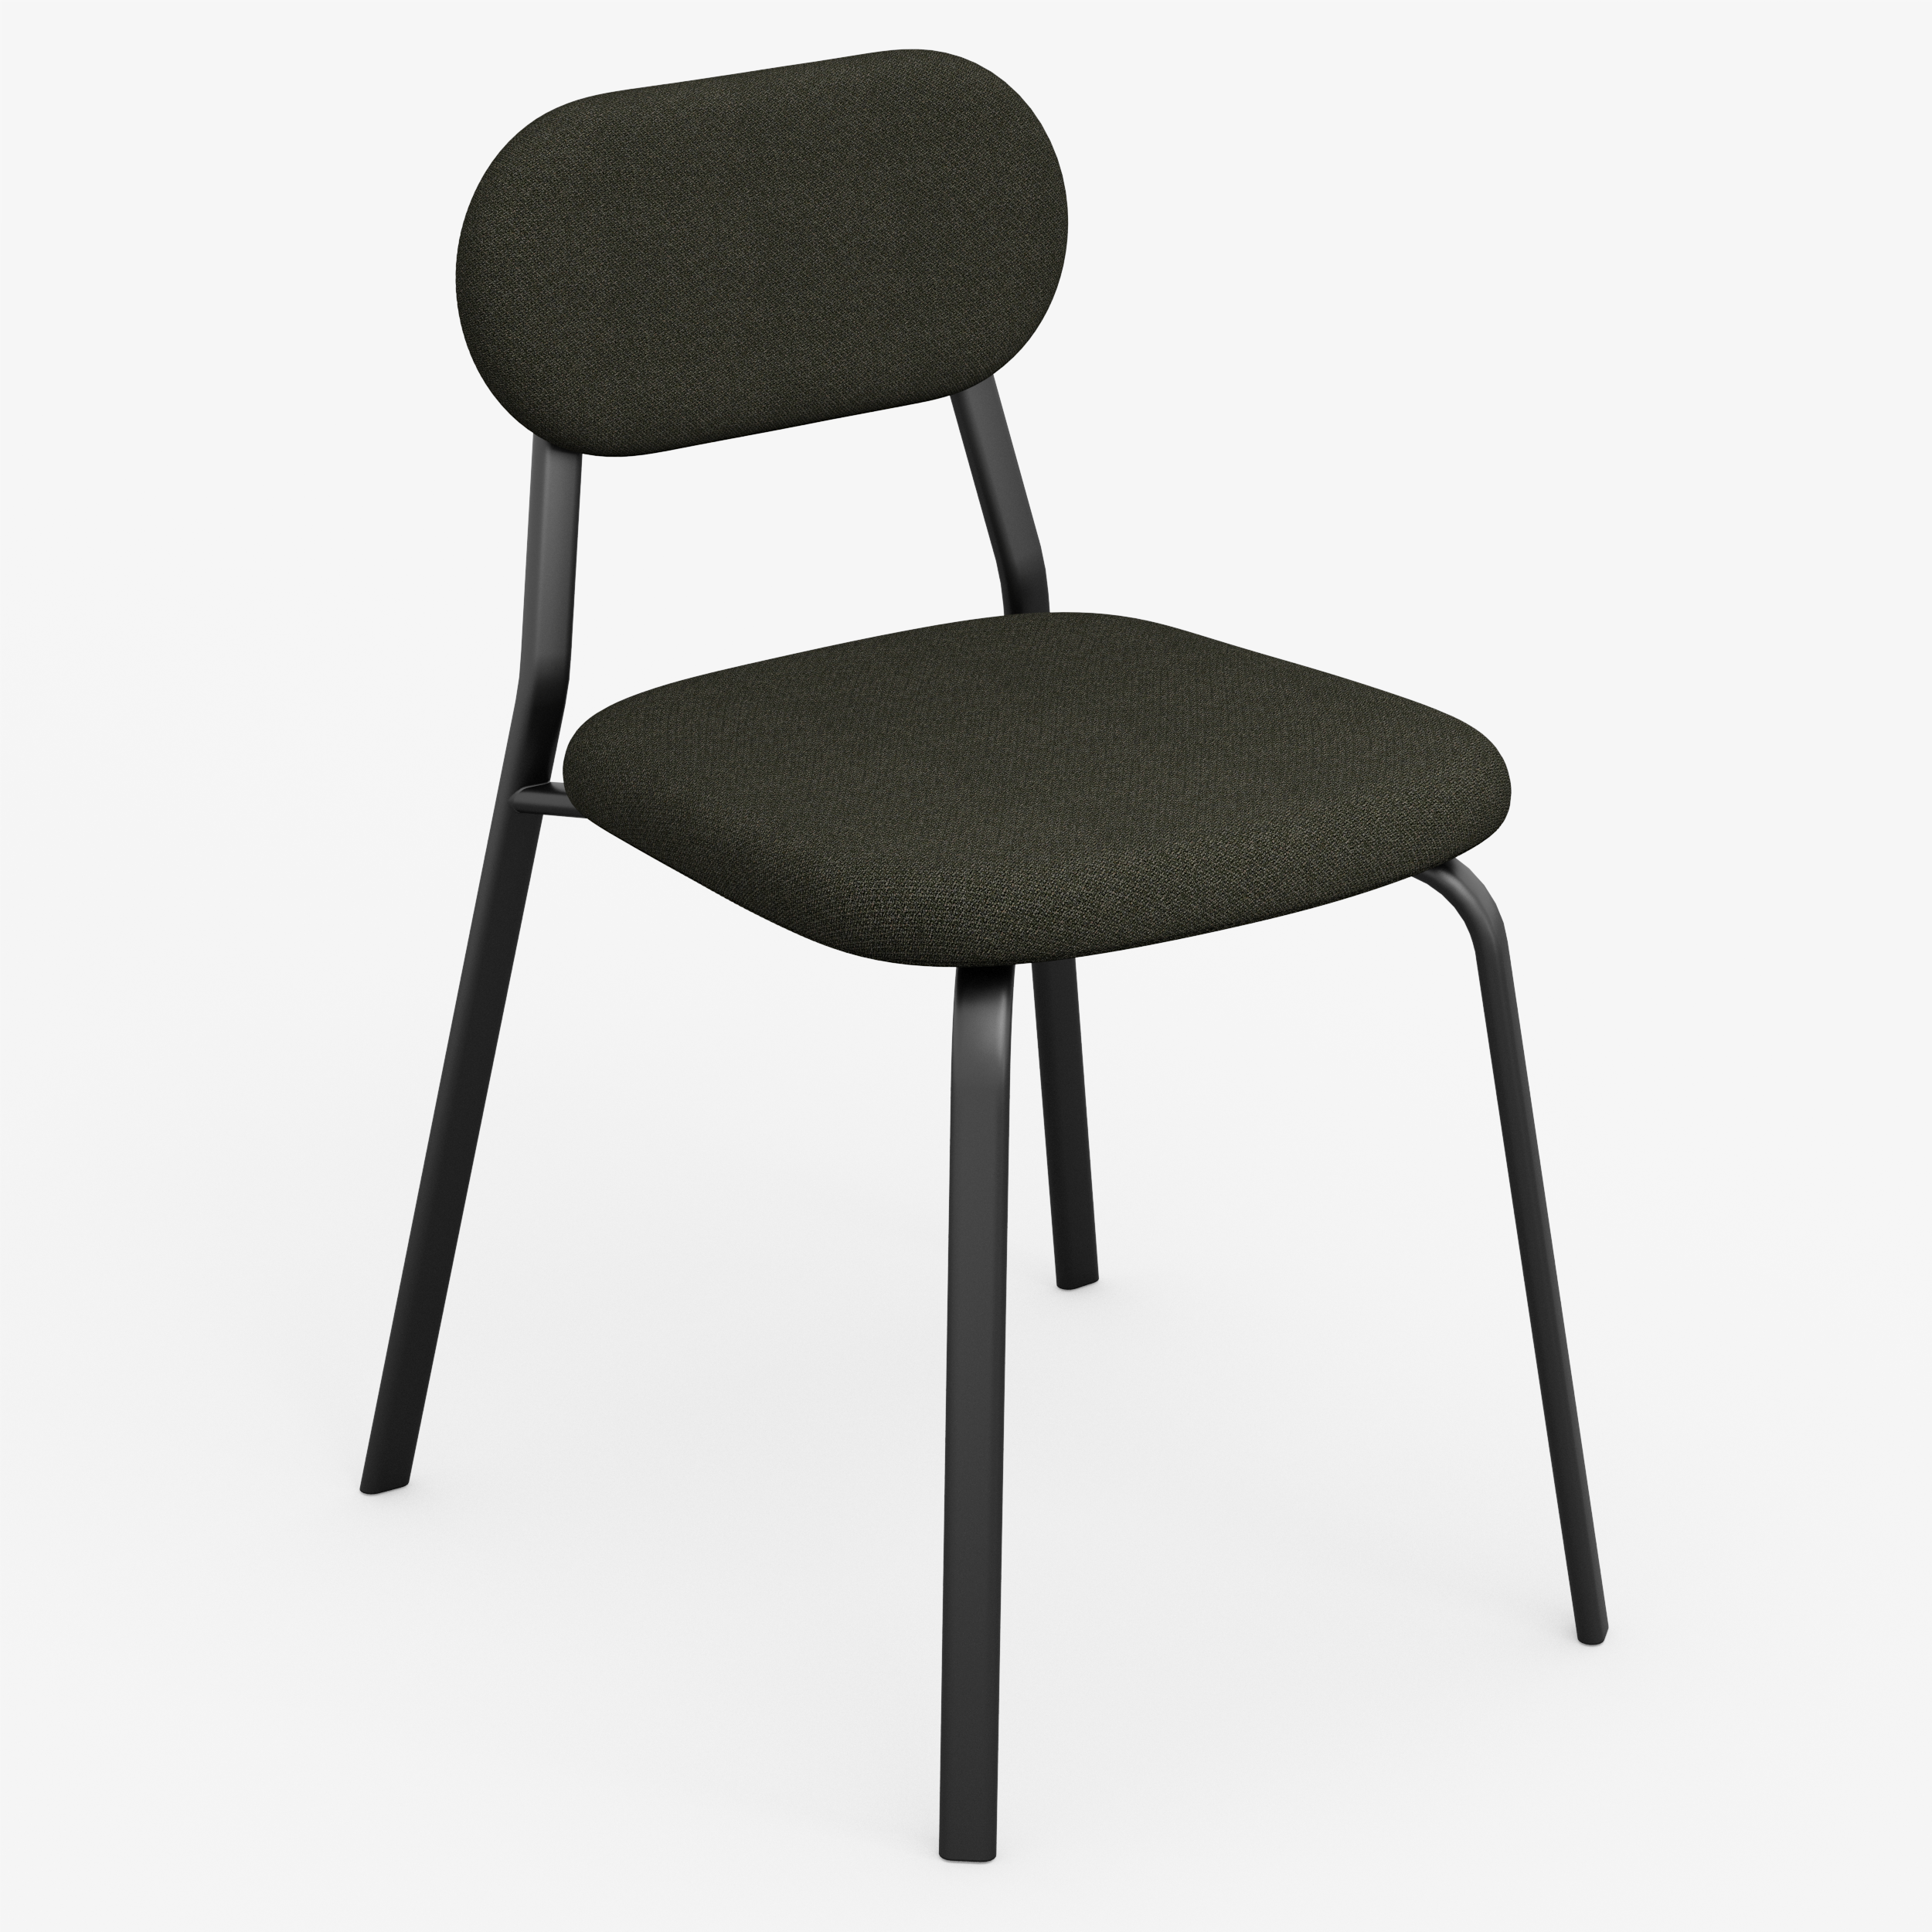 Form - Chair (Oval, Black)